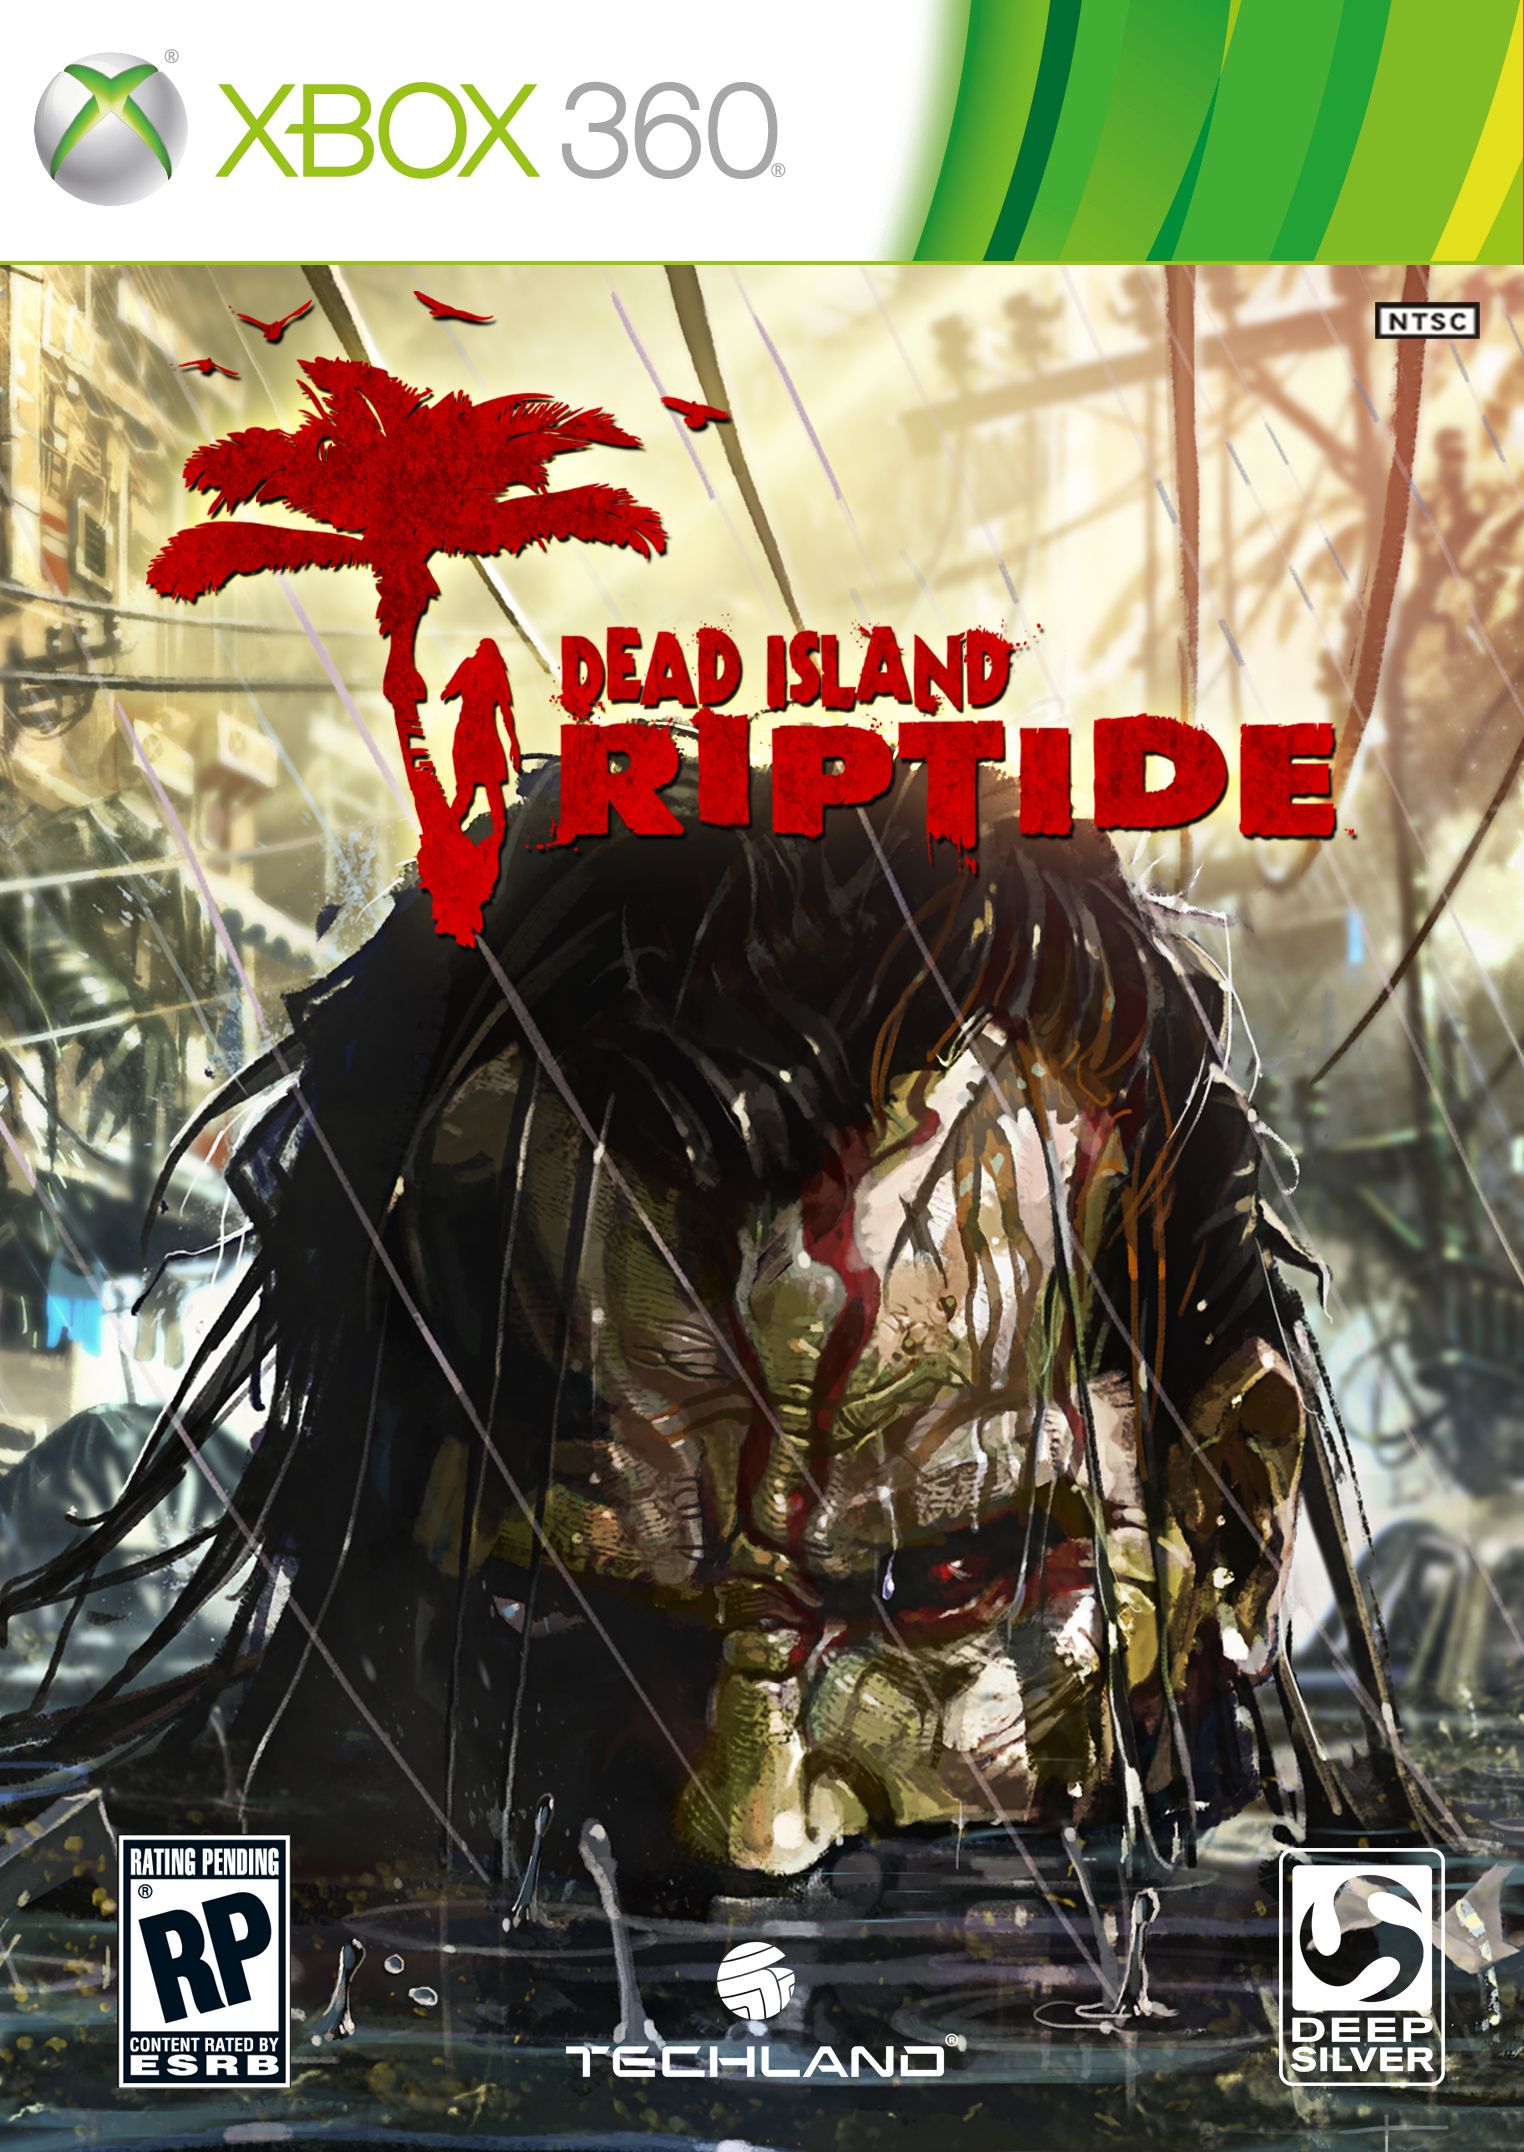 Dead Island 2 listed on  with February 3, 2023 release date, new box  art, screenshots, and description - Gematsu